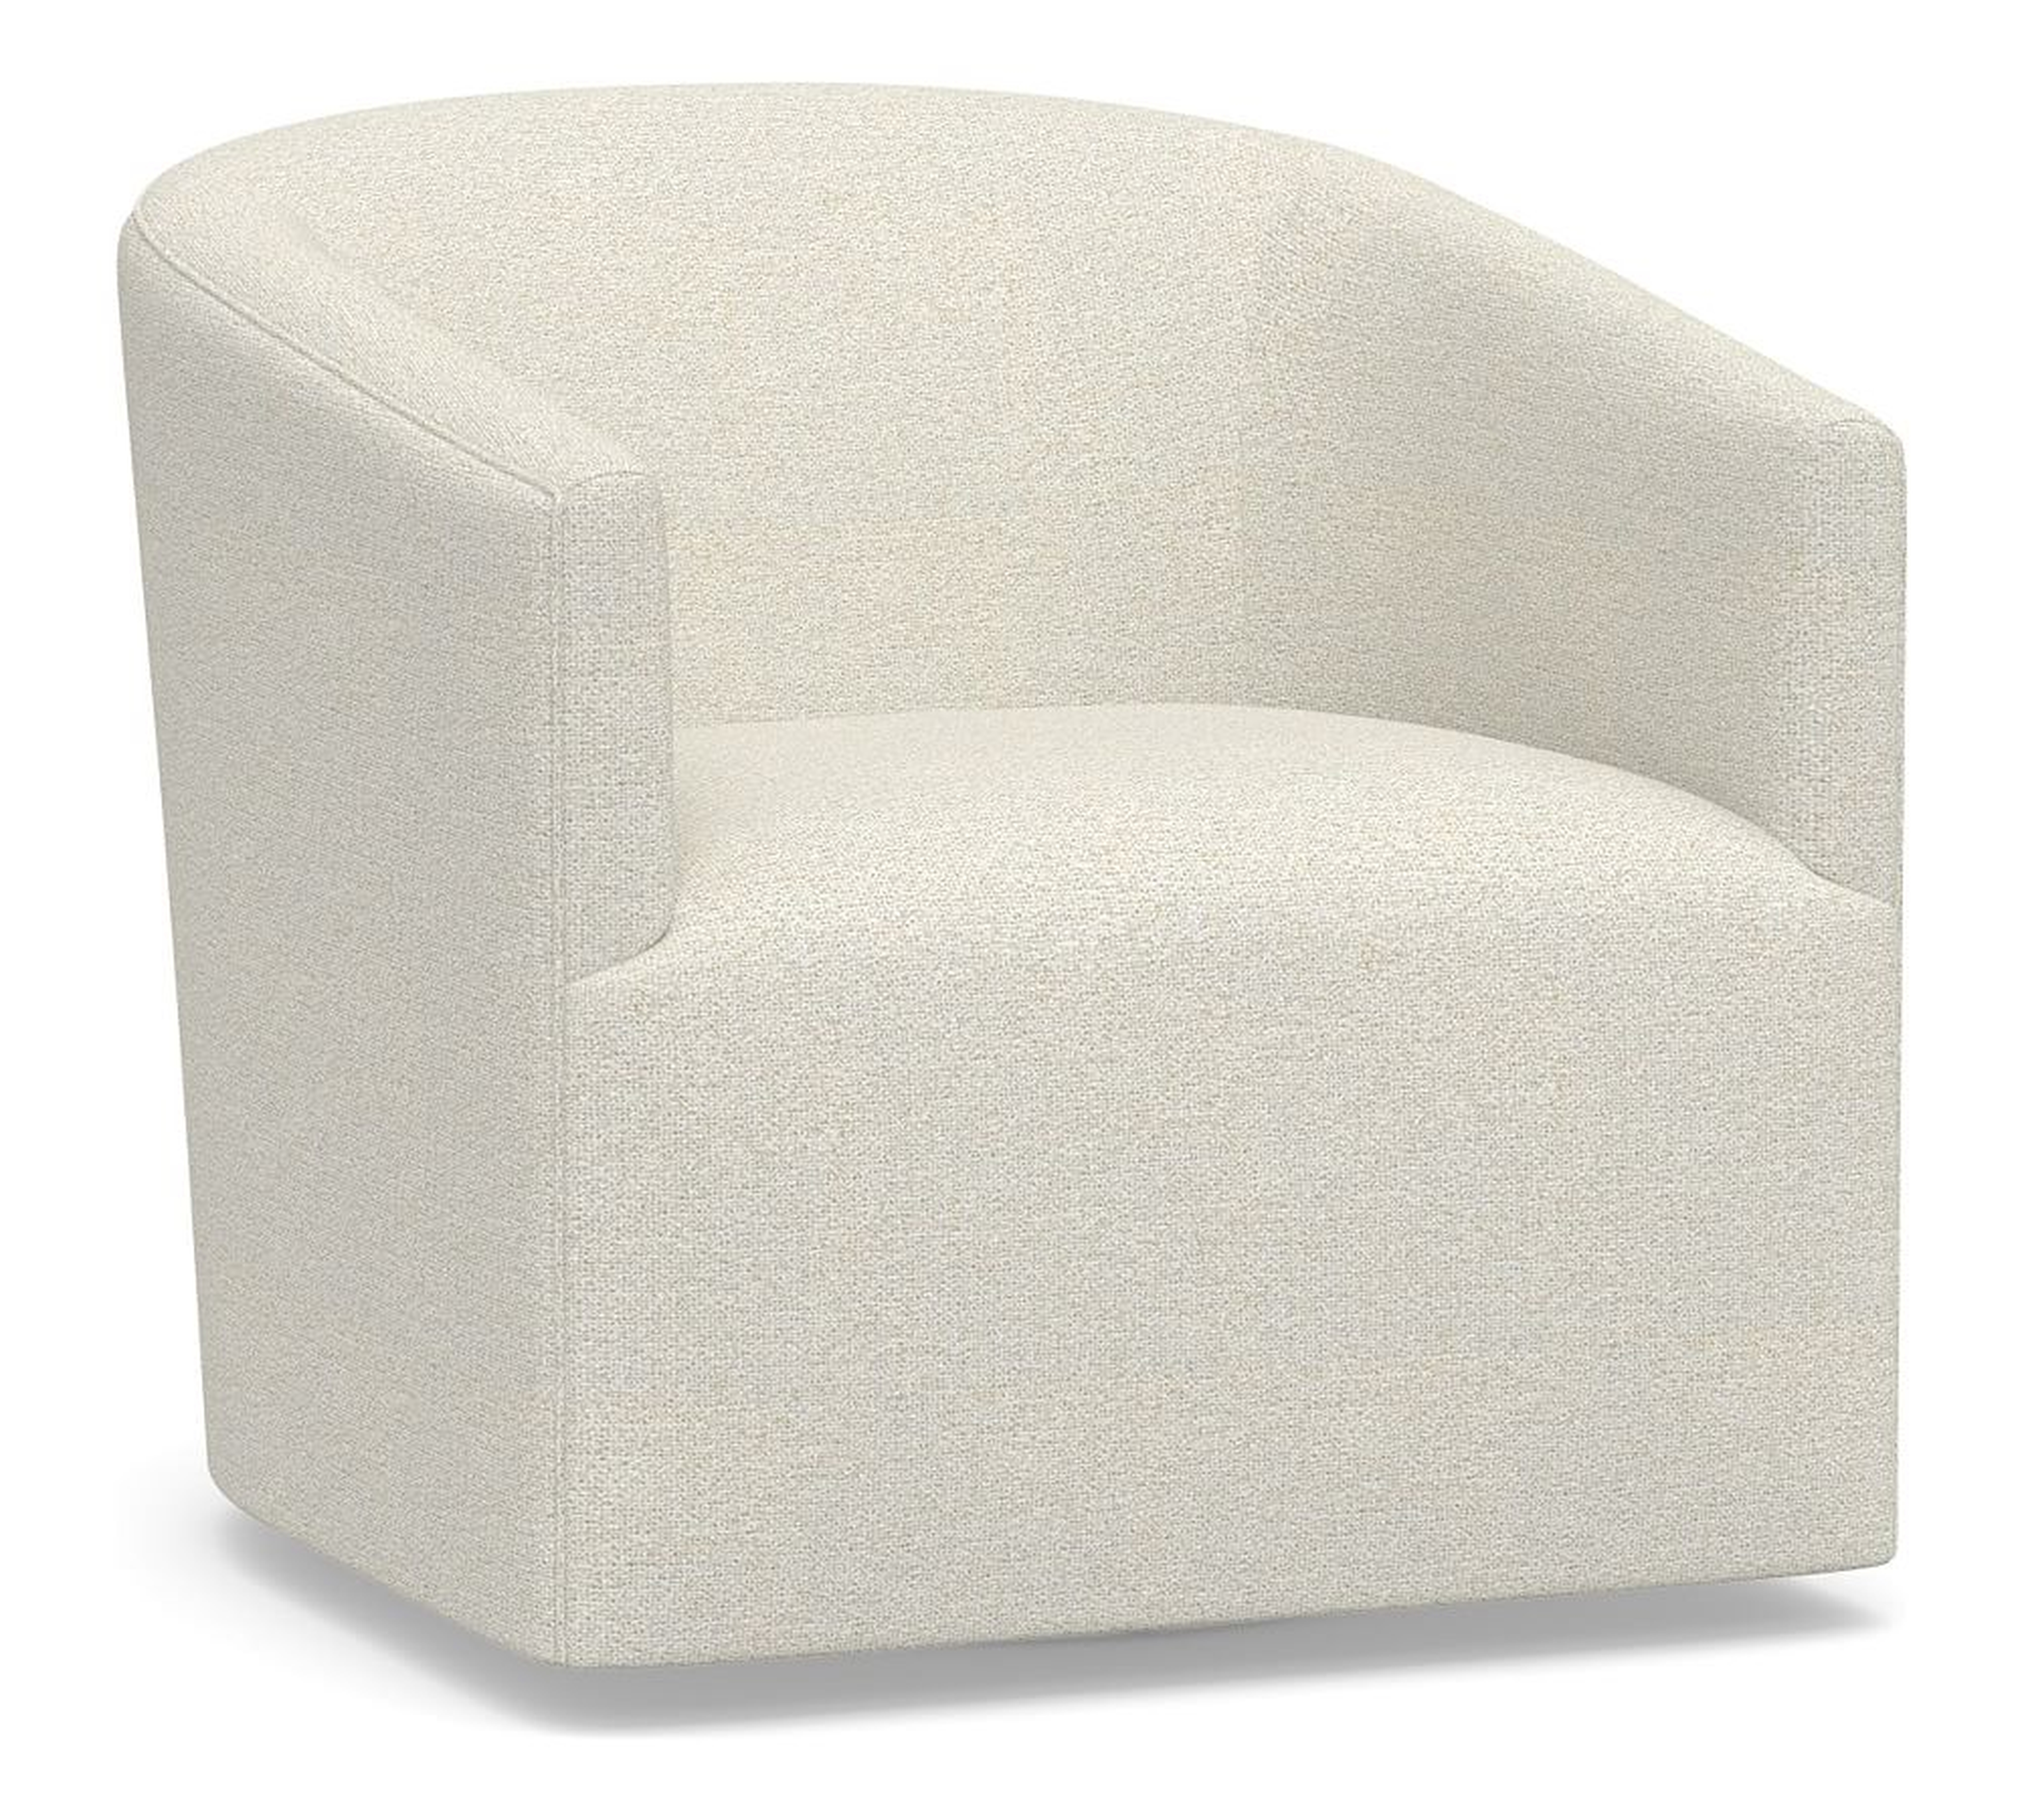 Baldwin Upholstered Swivel Armchair, Polyester Wrapped Cushions, Performance Boucle Oatmeal - Pottery Barn